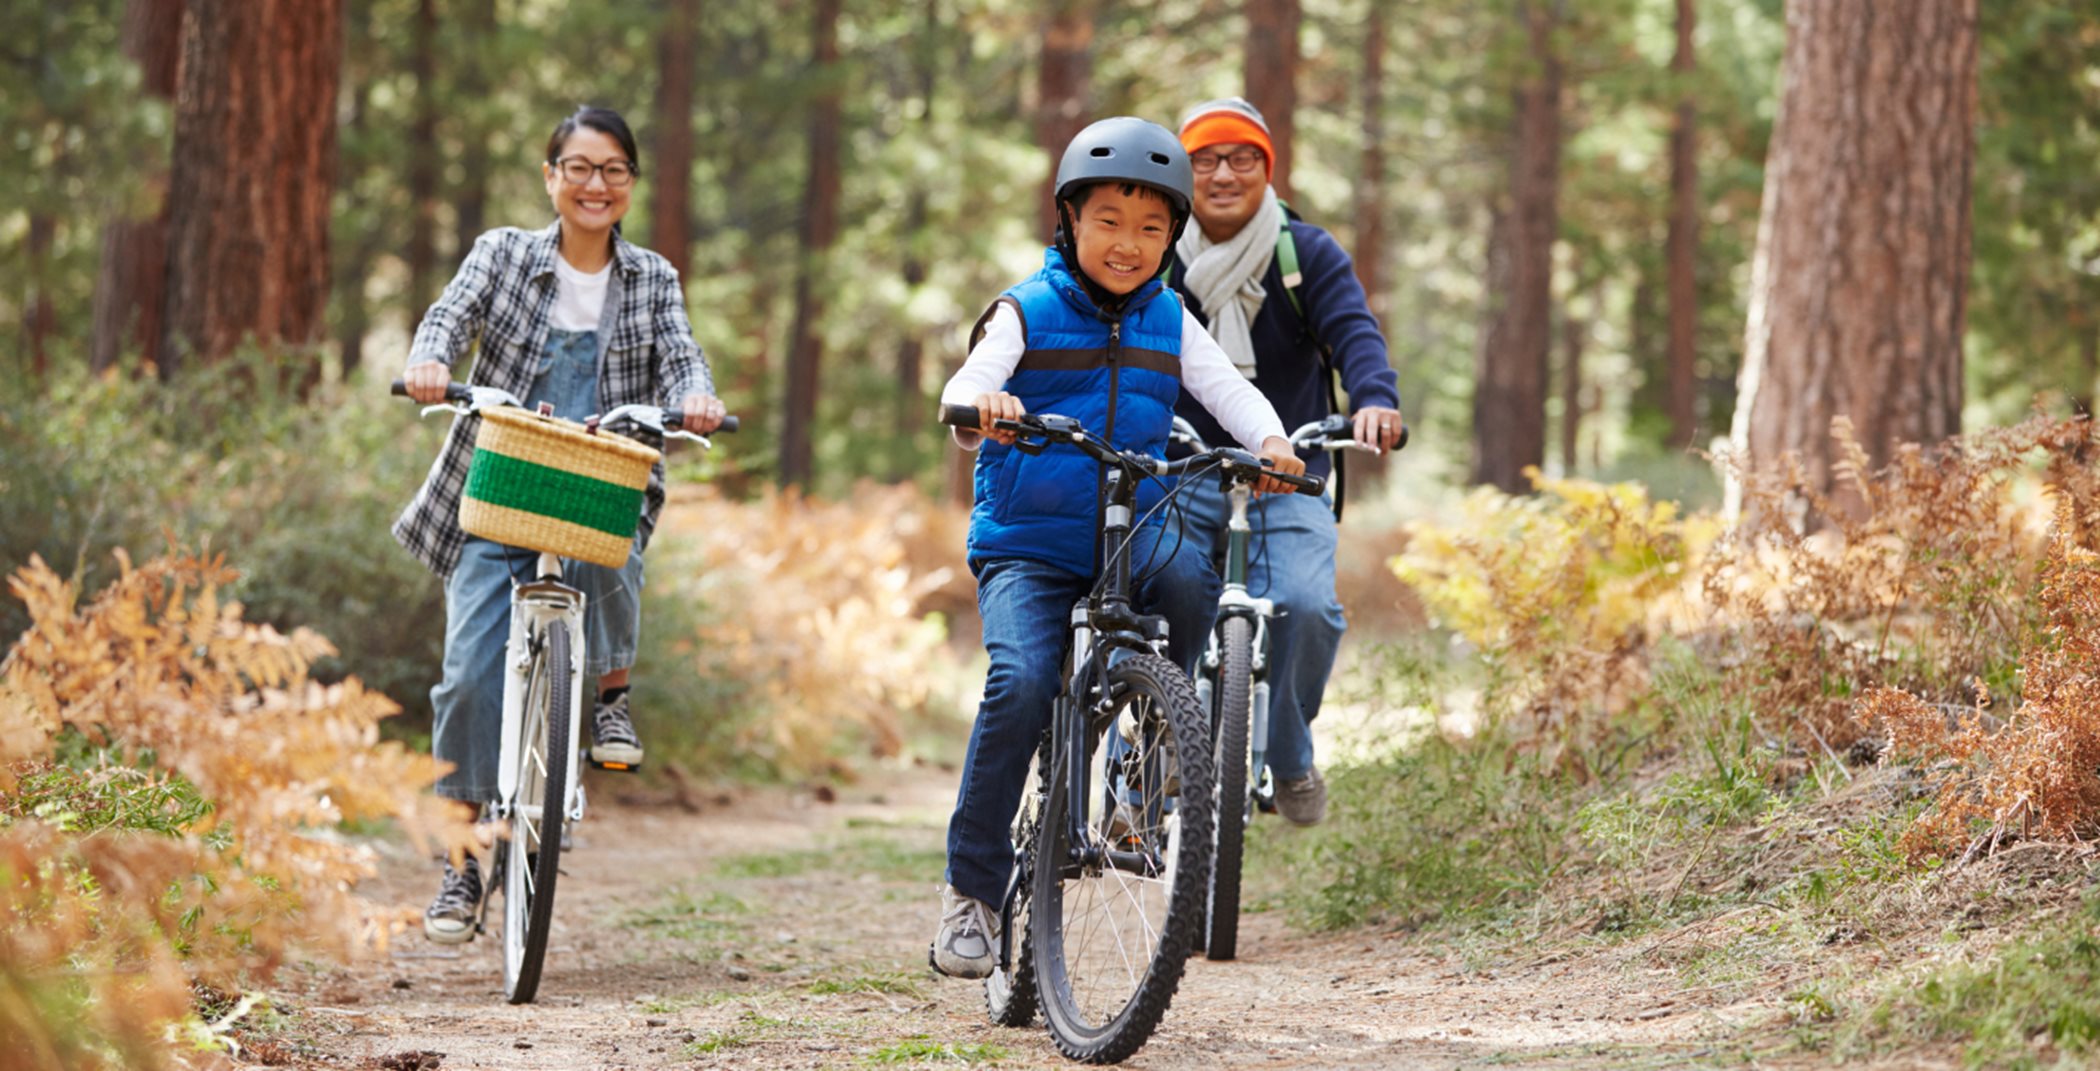 Family riding Bikes in Forest